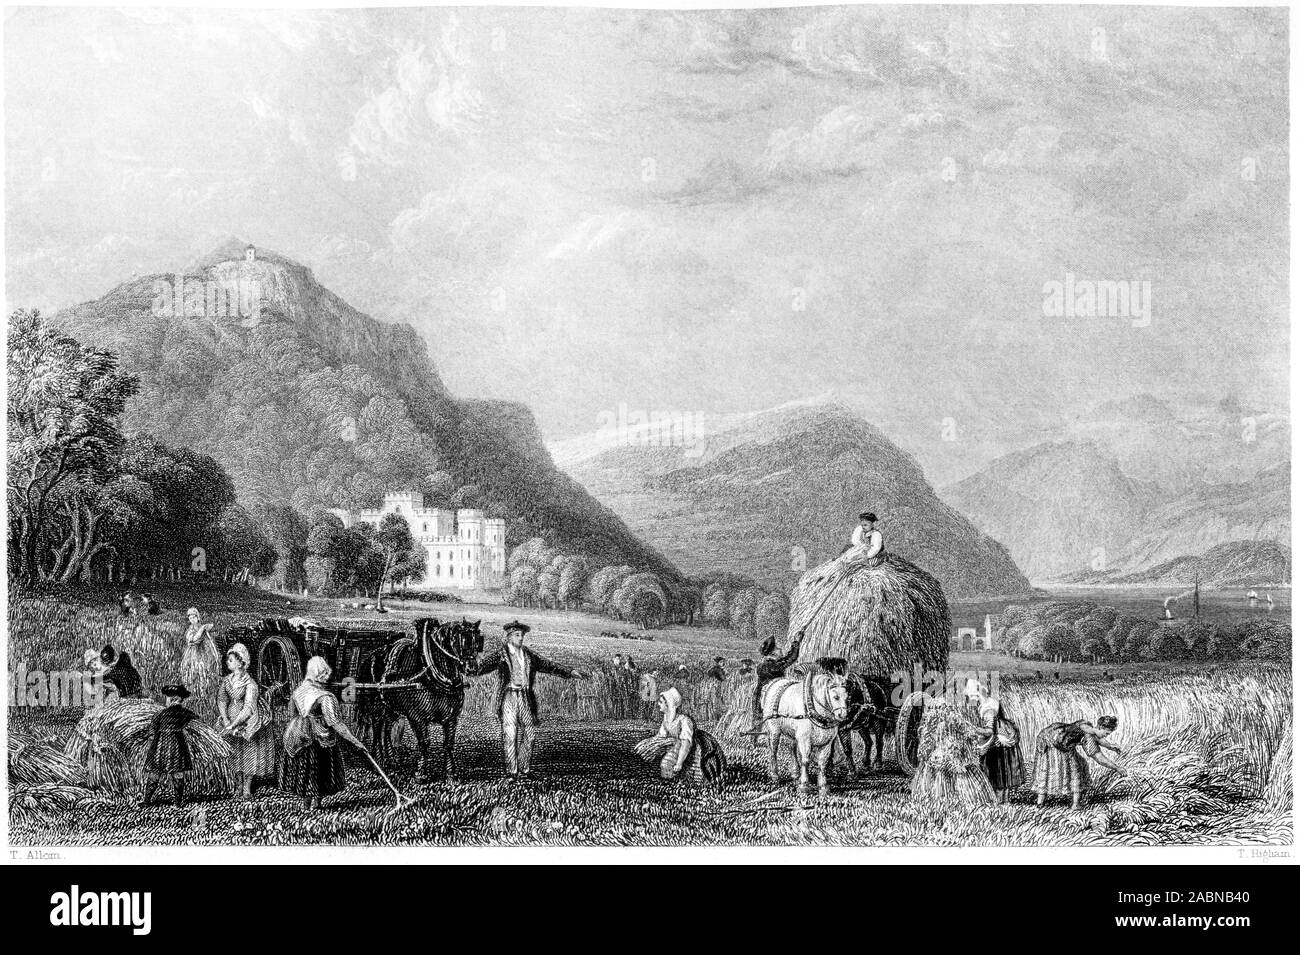 An engraving of Inverary (Inveraray) Castle scanned at high resolution from a book printed in 1859. Oat Harvest ?  Believed copyright free. Stock Photo